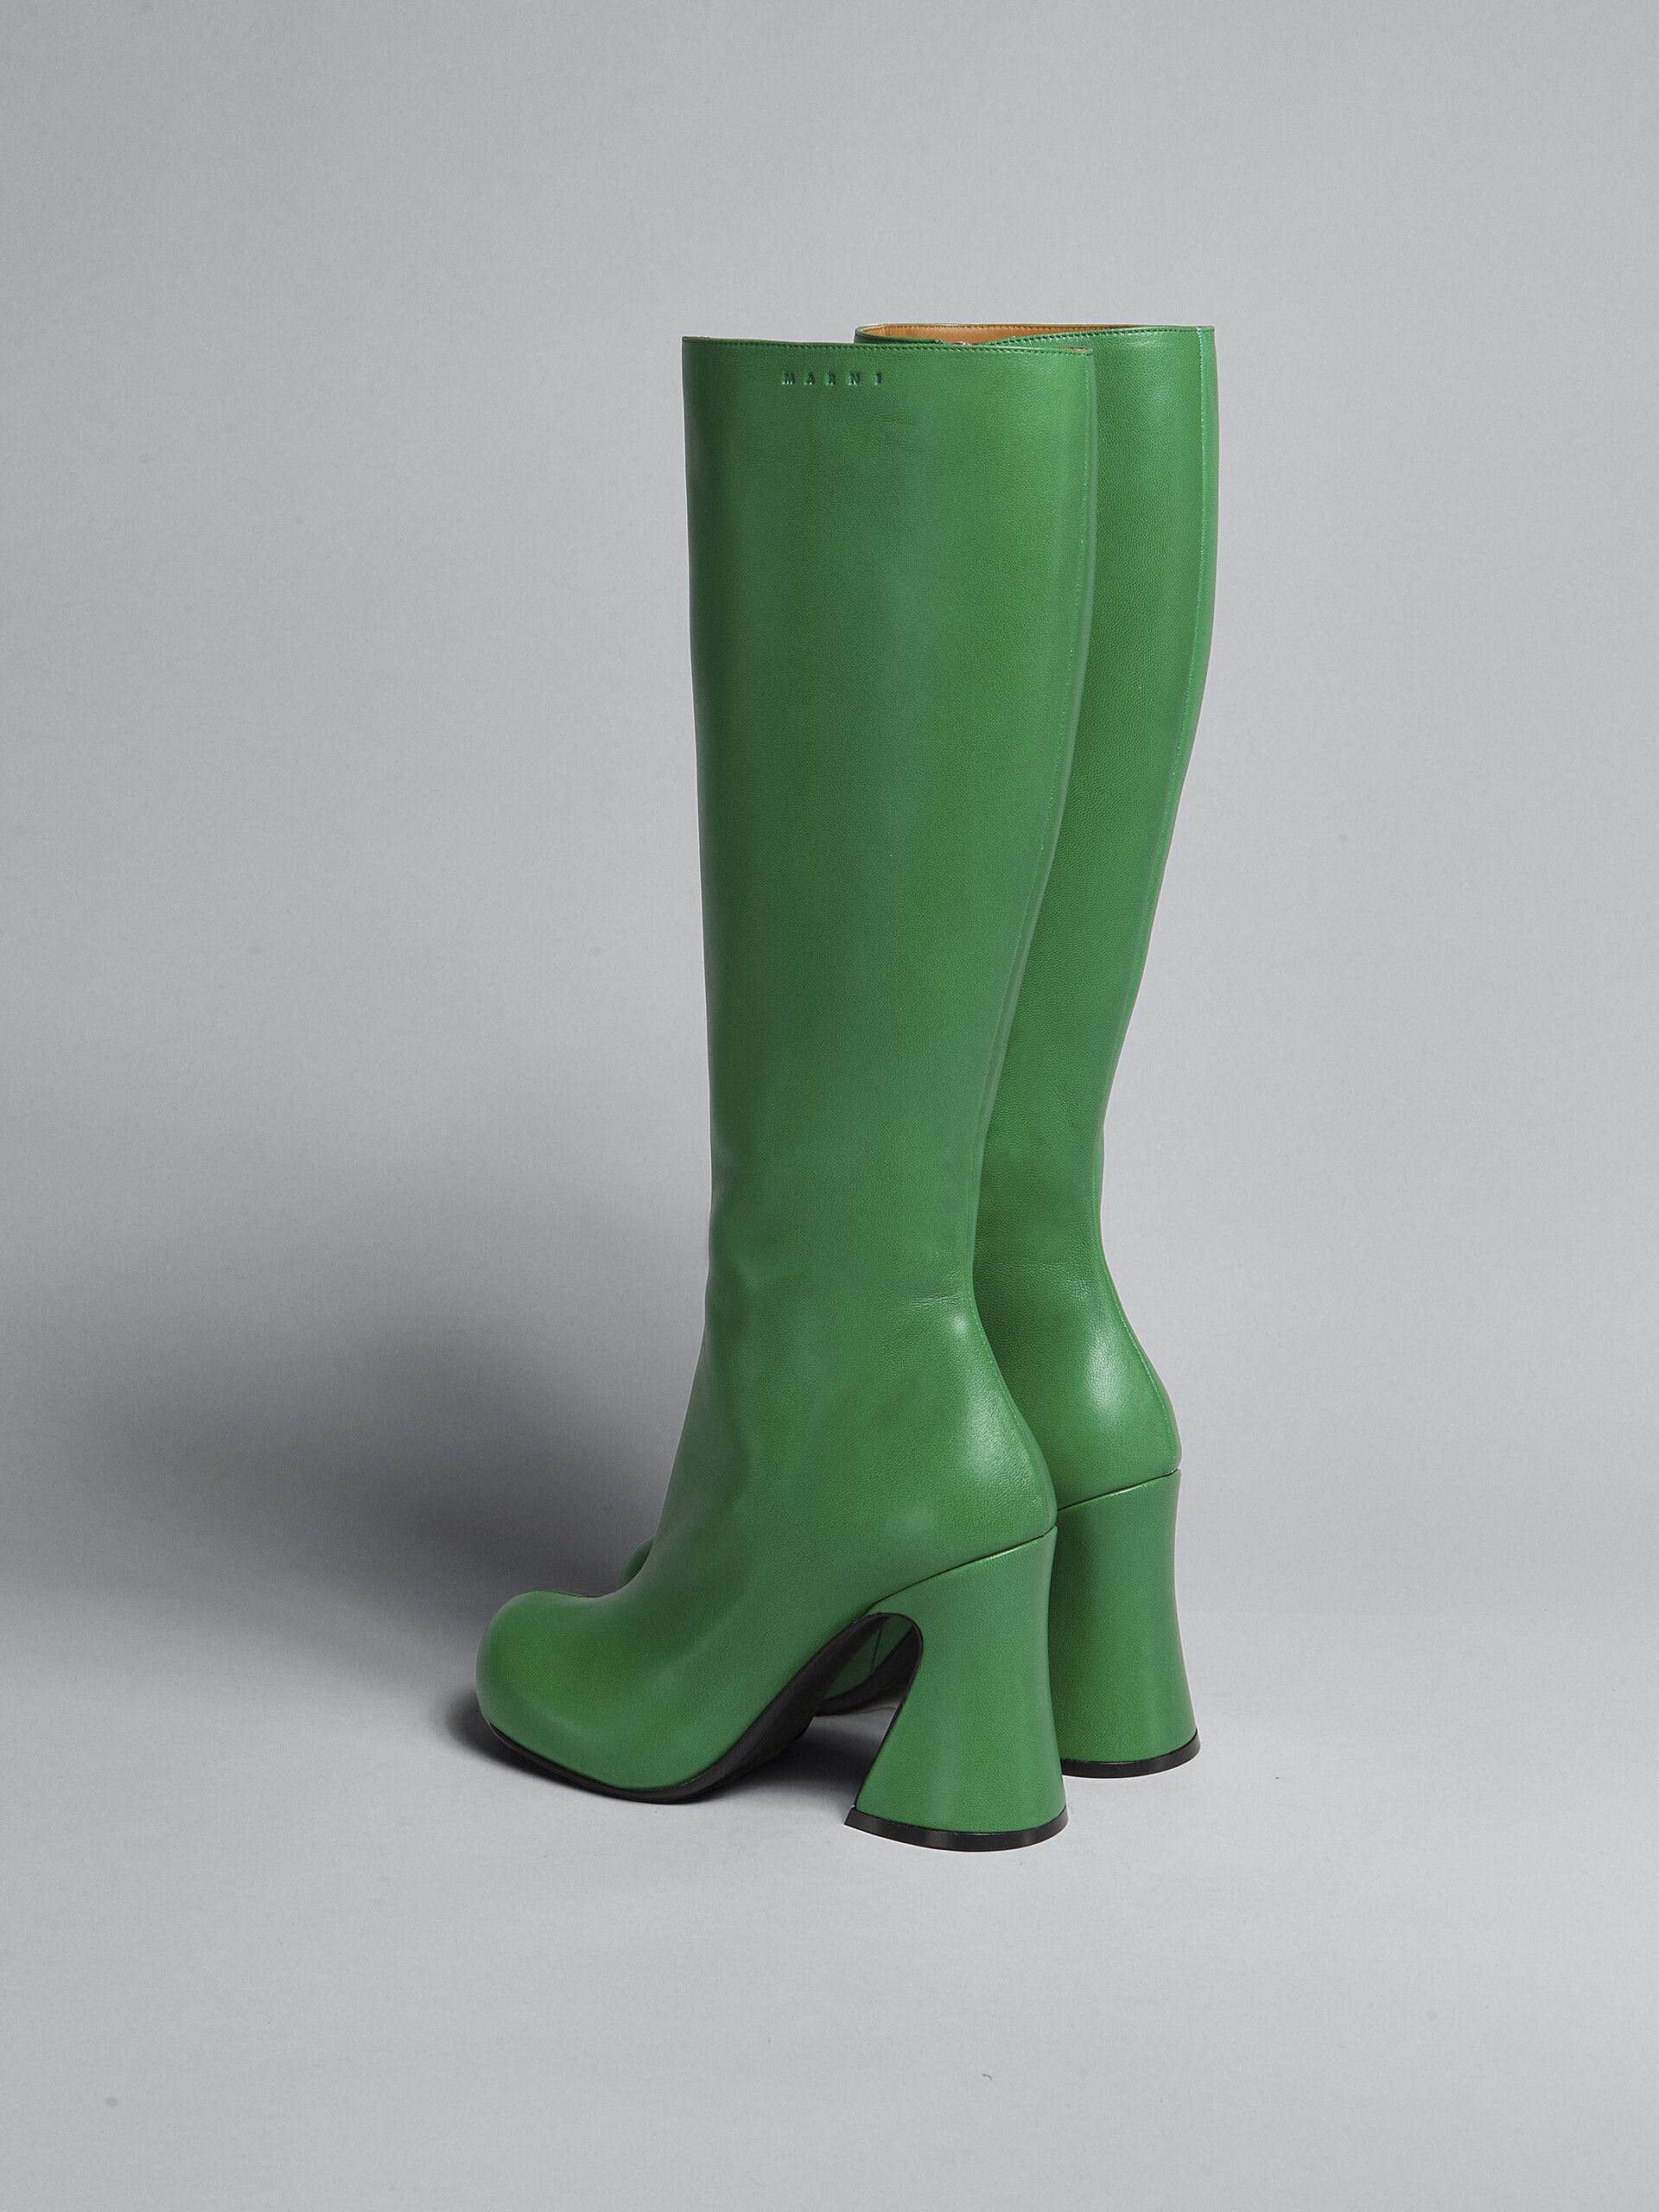 Green leather boot - Boots - Image 3